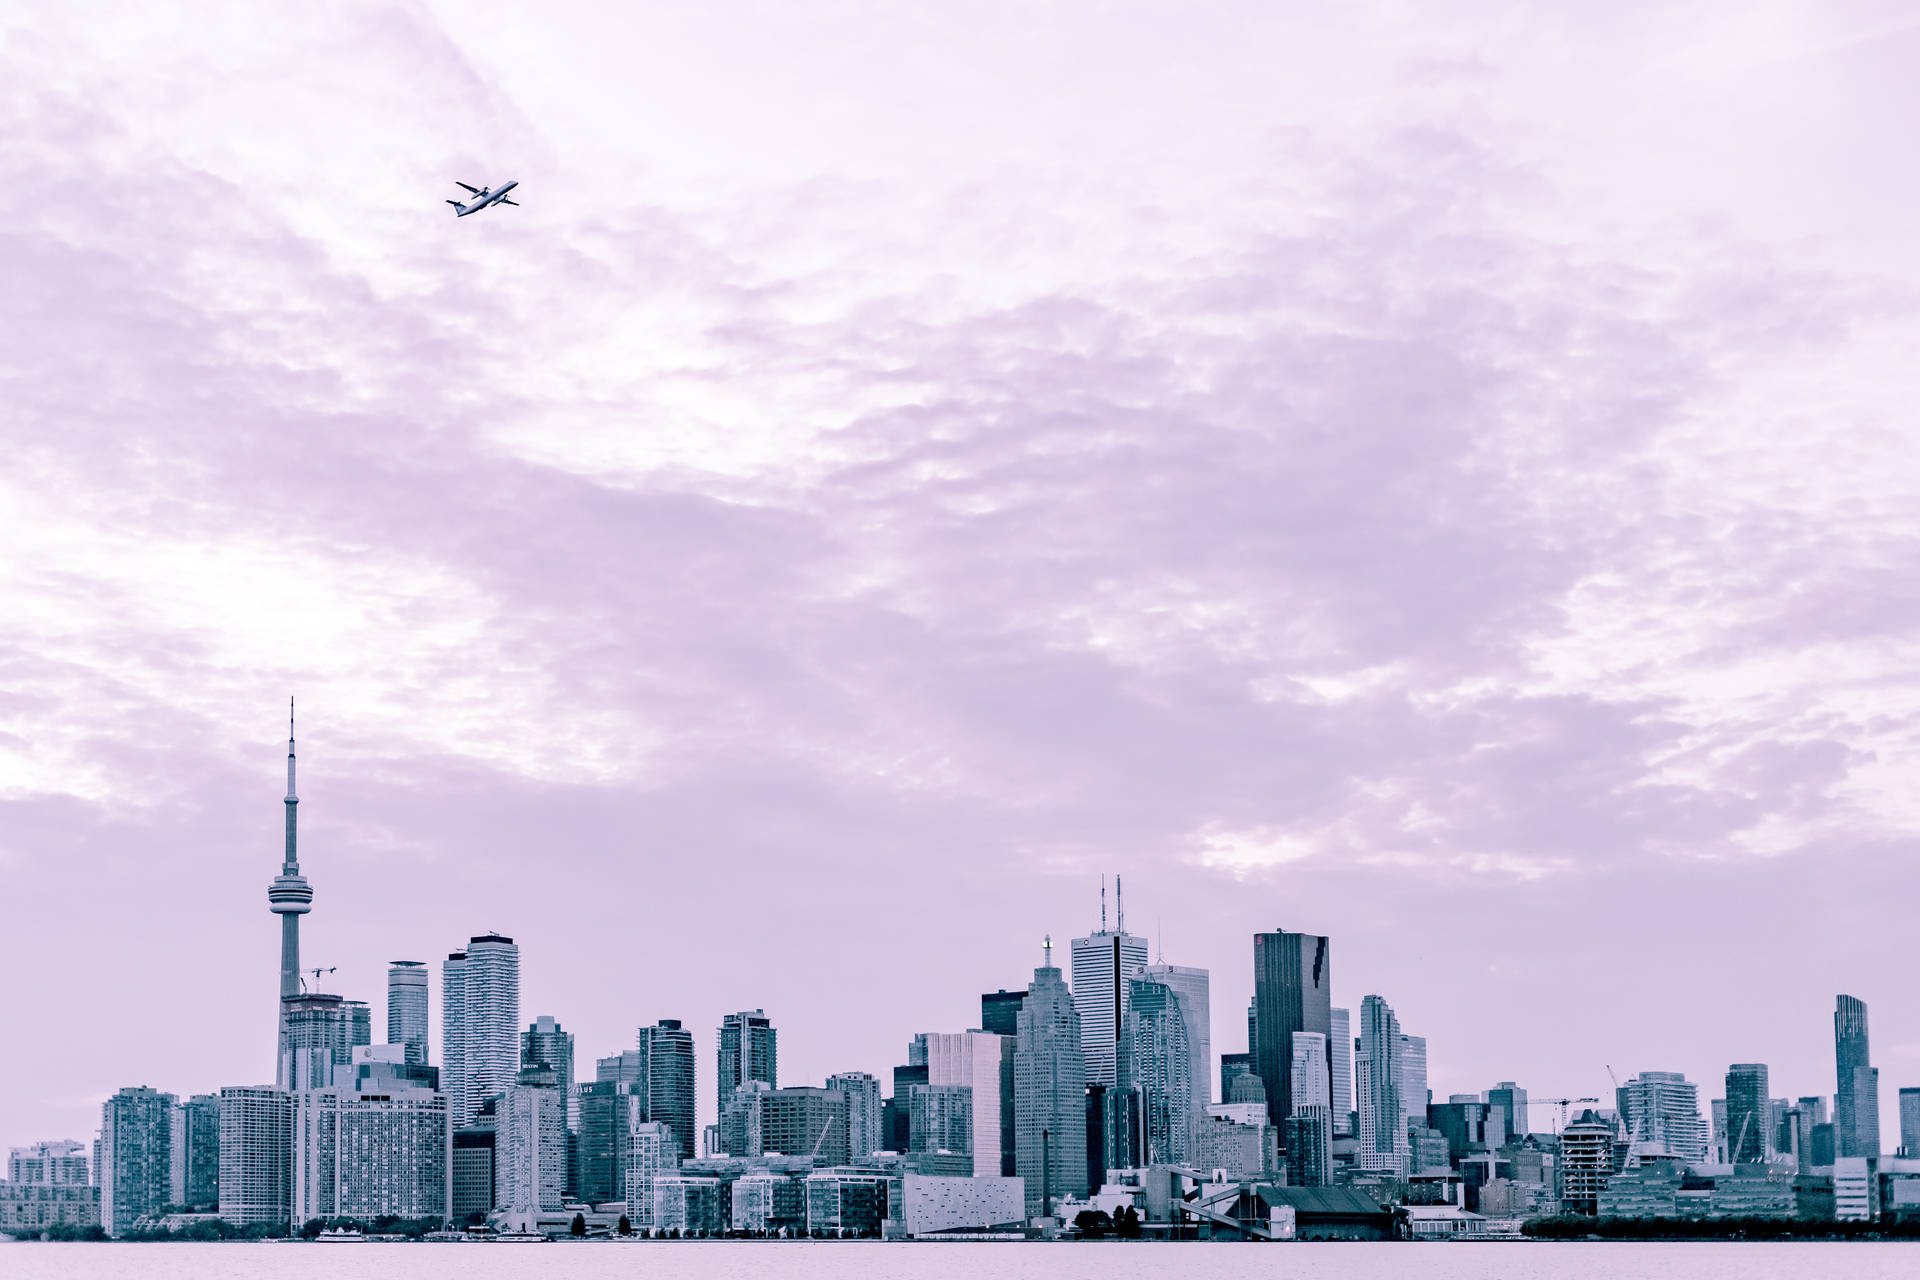 Aesthetic photography wallpaper of city scape under a flying plane. 